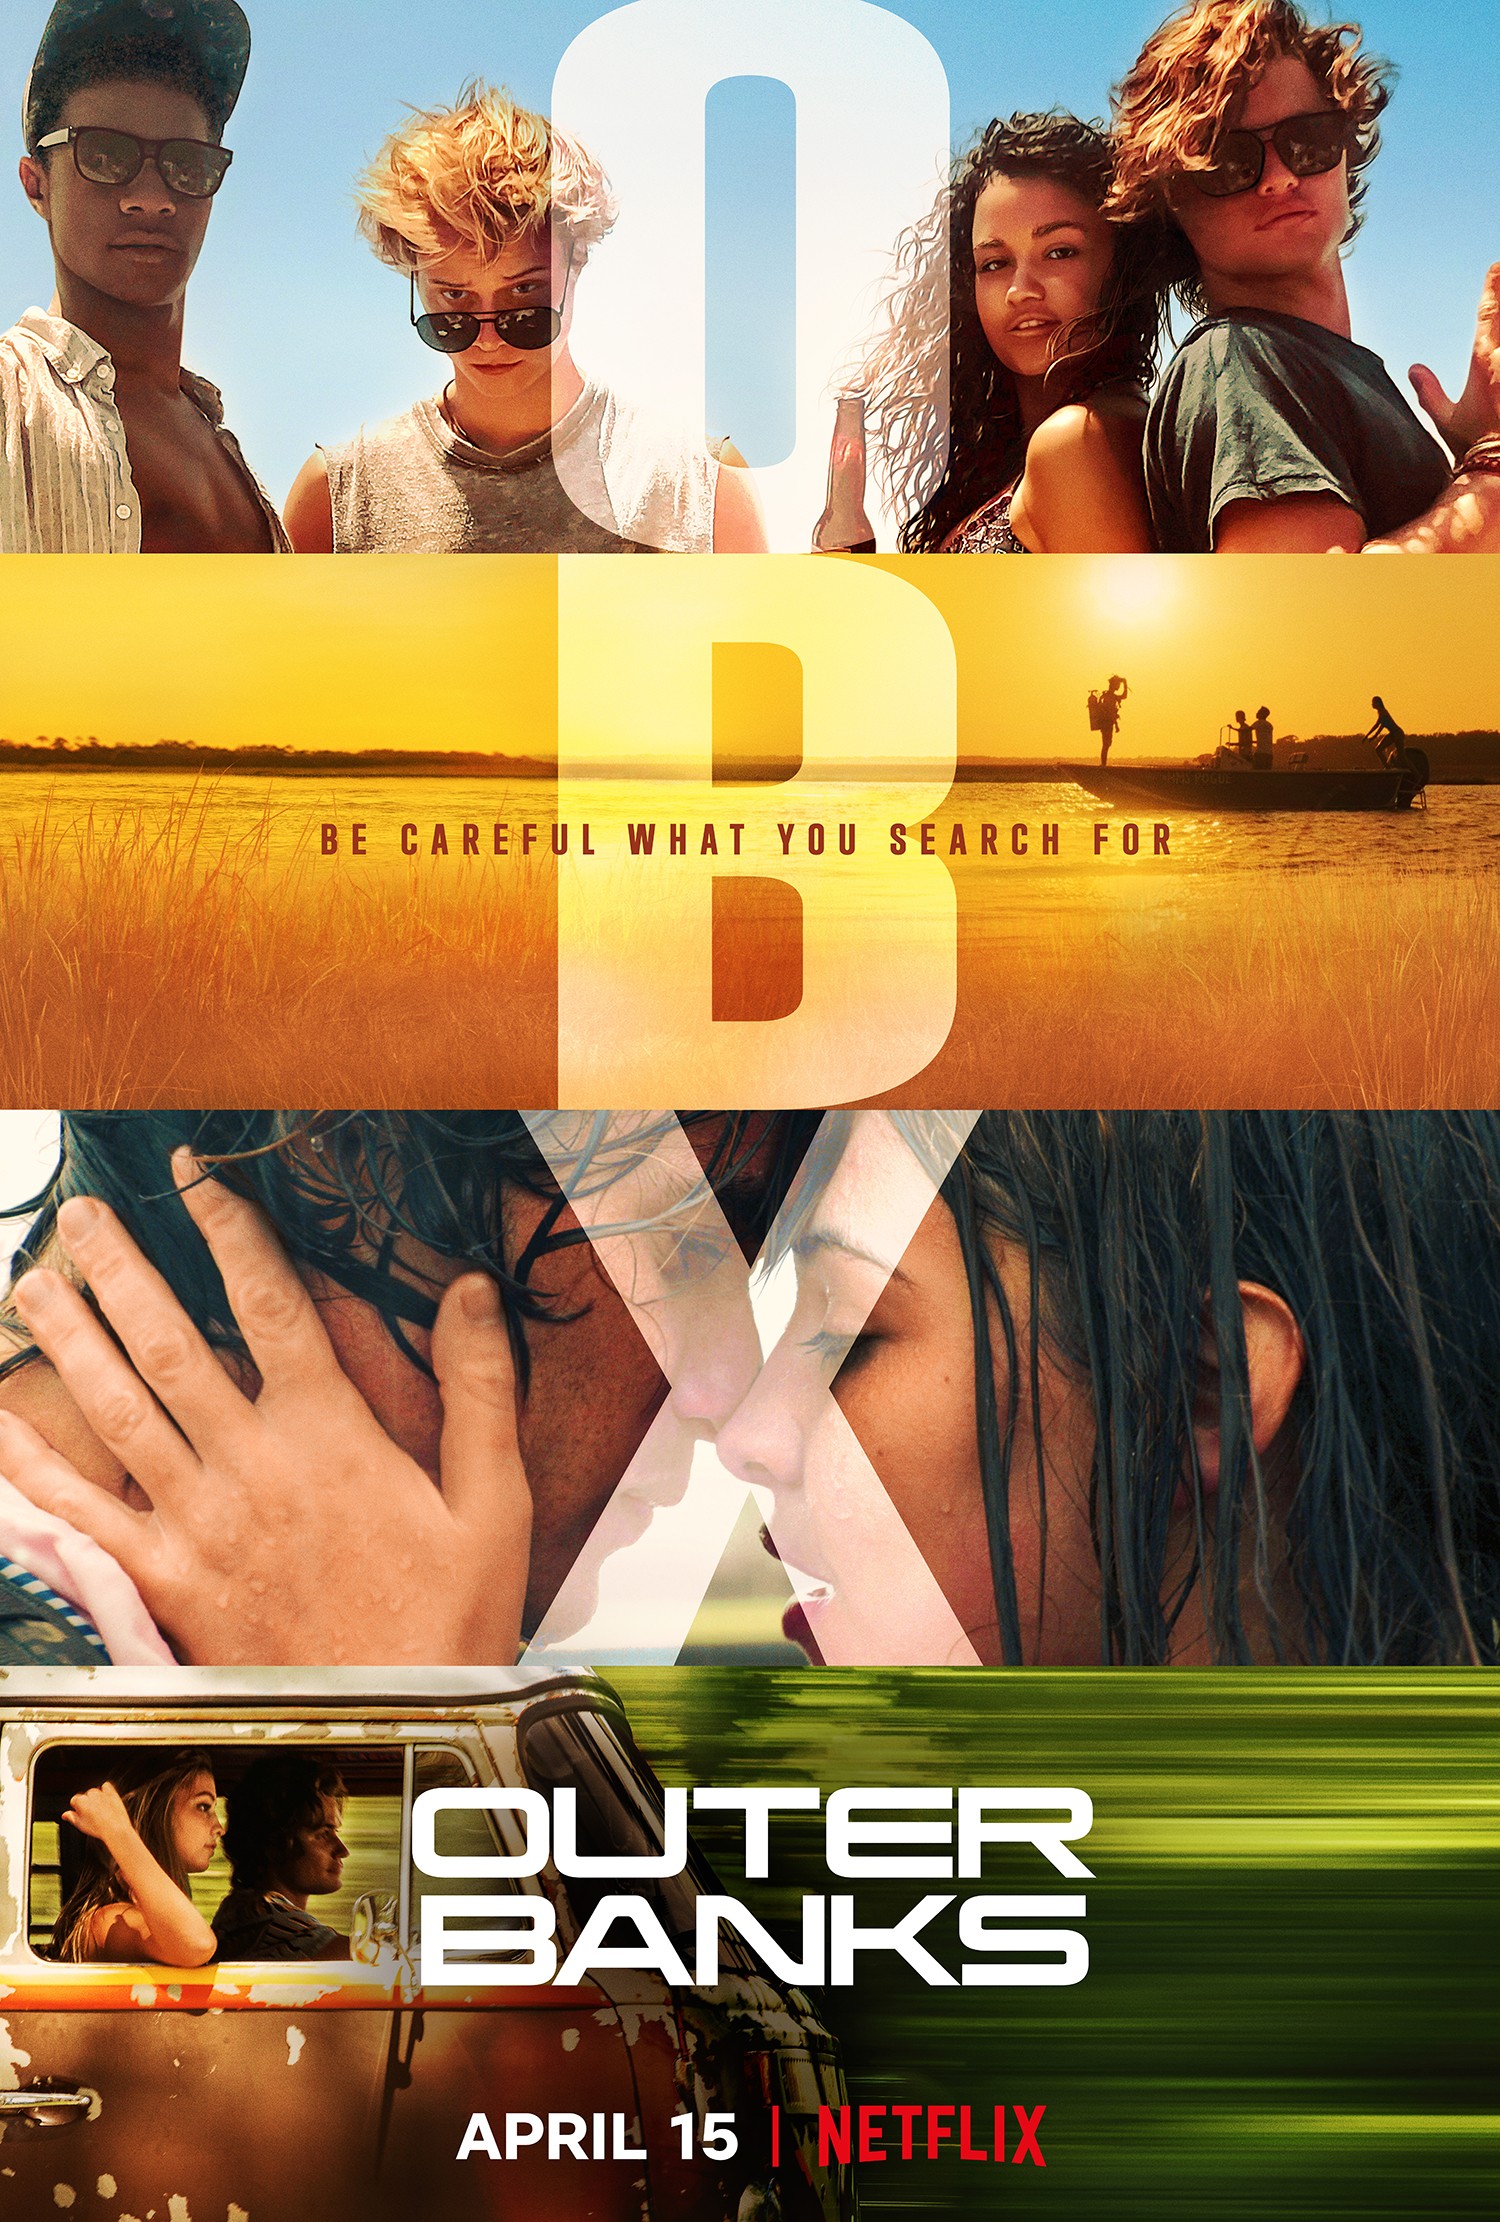 Outer Banks Season 2 Netflix Release Date, Cast And Plot - What We